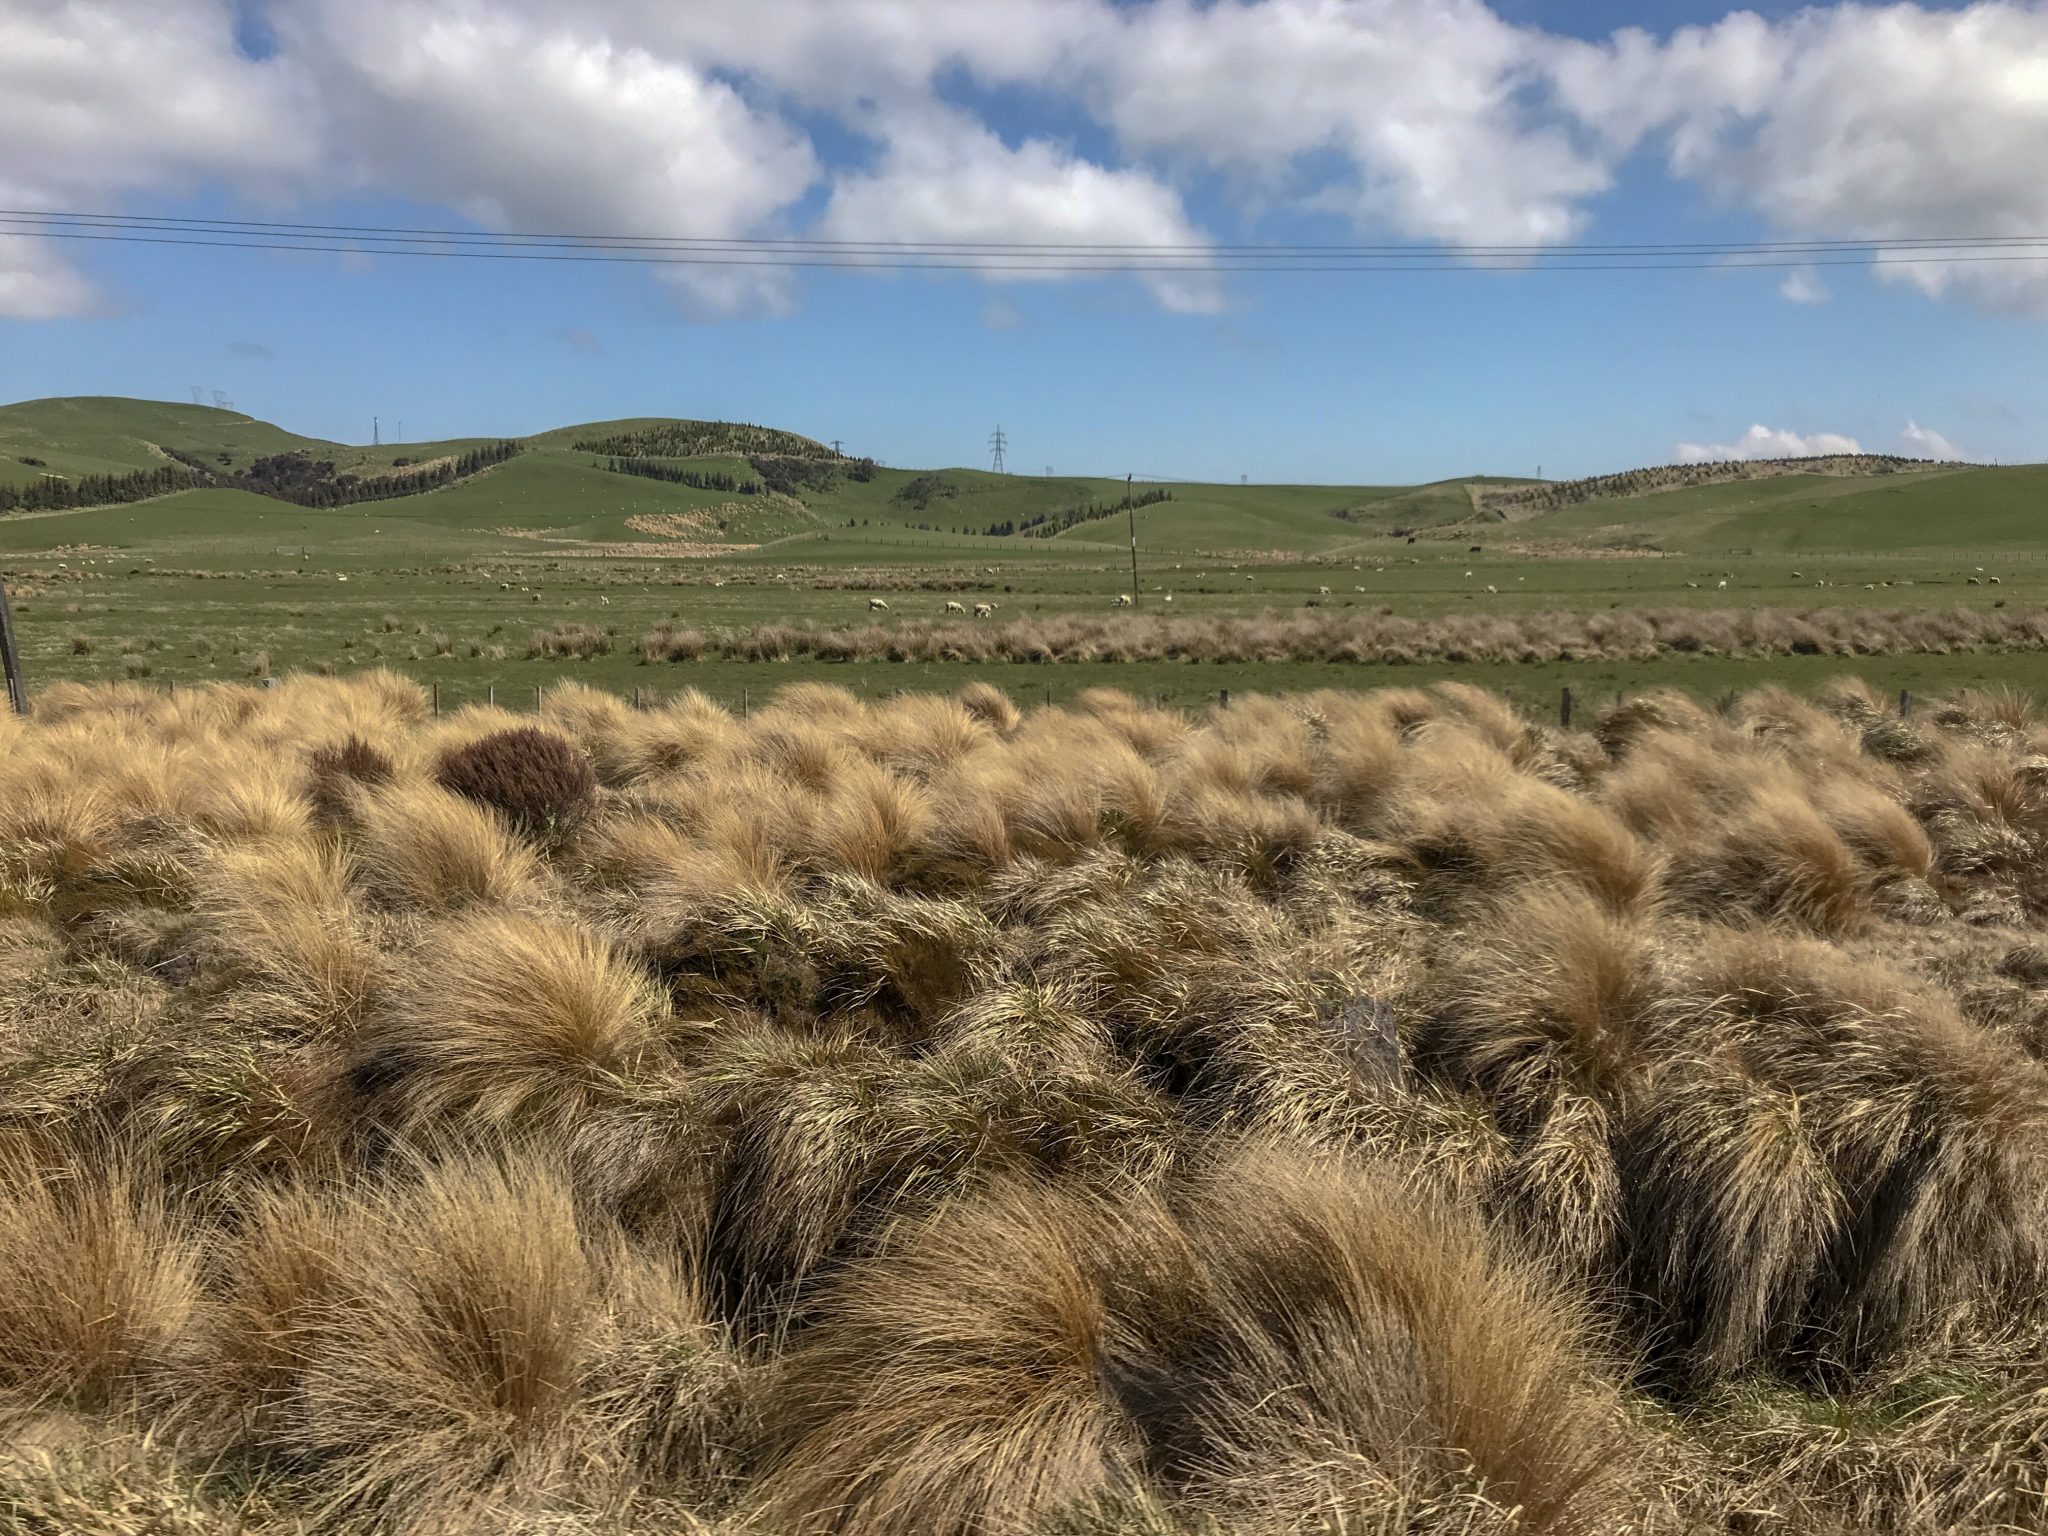 tussock grass and landscape in central New Zealand North Island